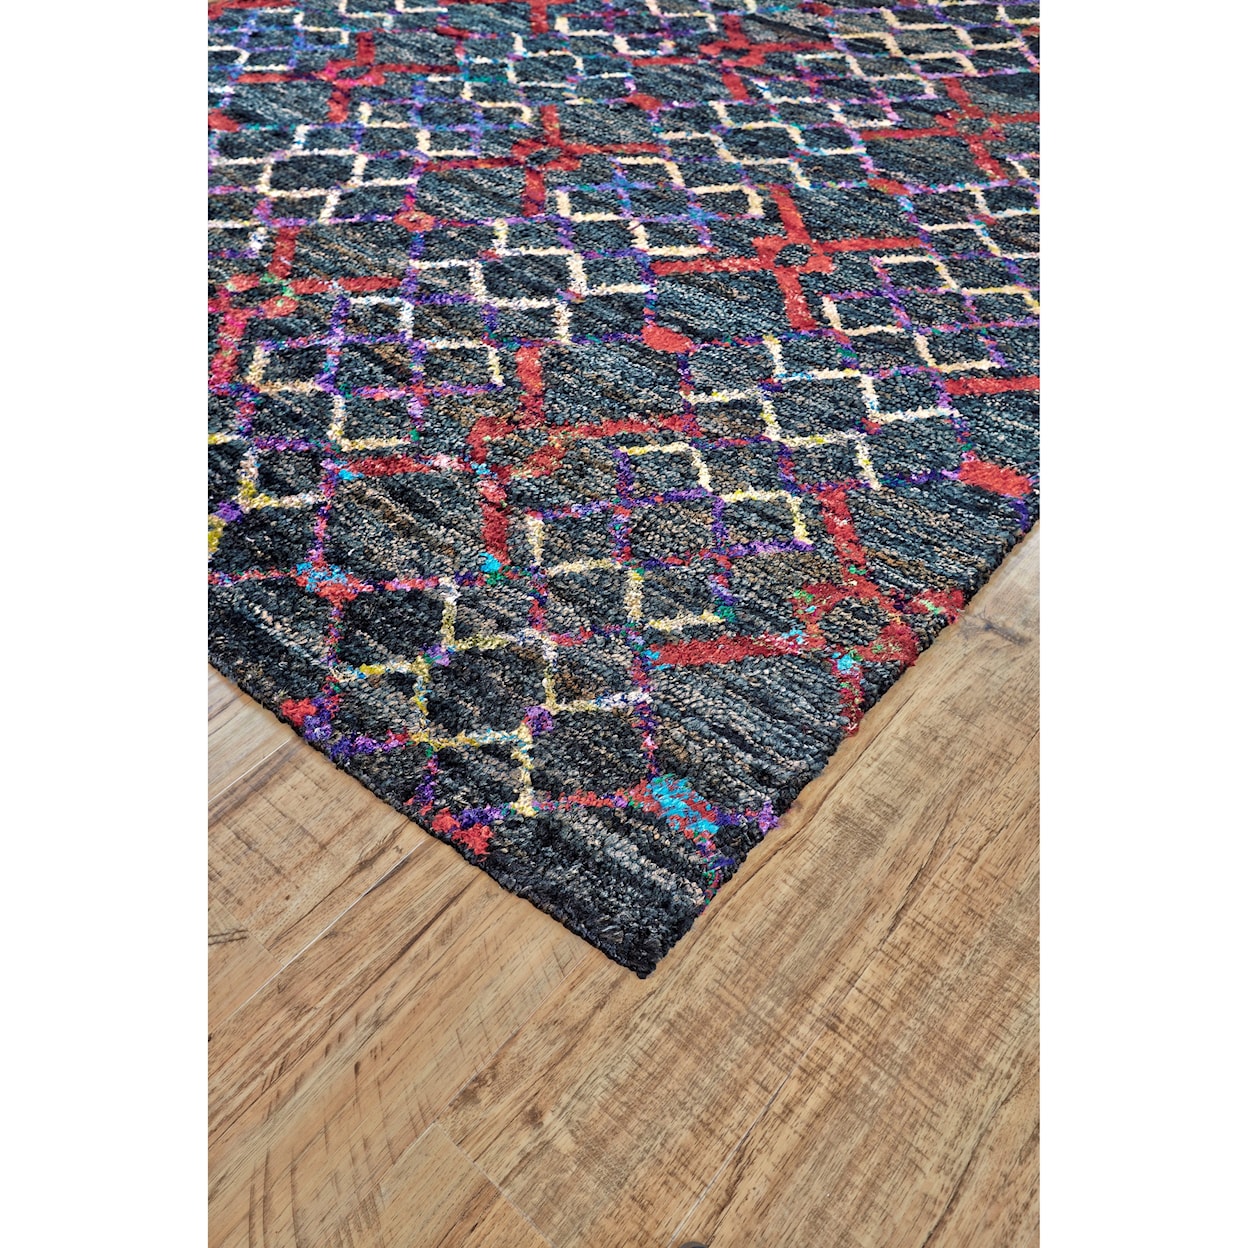 Feizy Rugs Tortola Flame 9'-6" x 13'-6" Area Rug